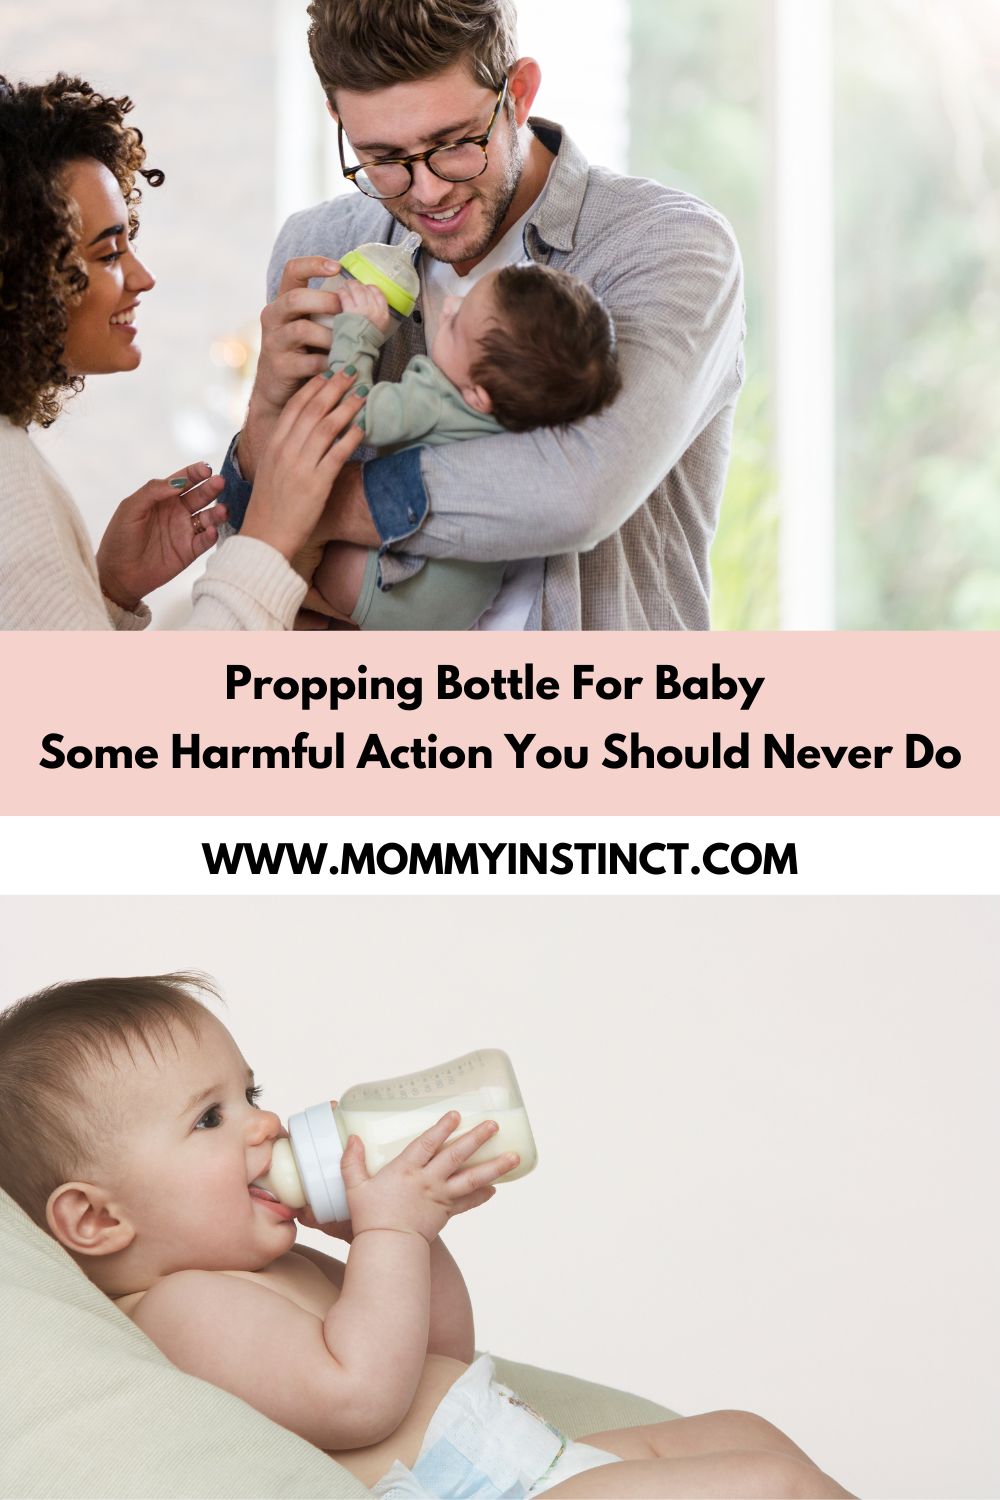 Propping a bottle for a baby